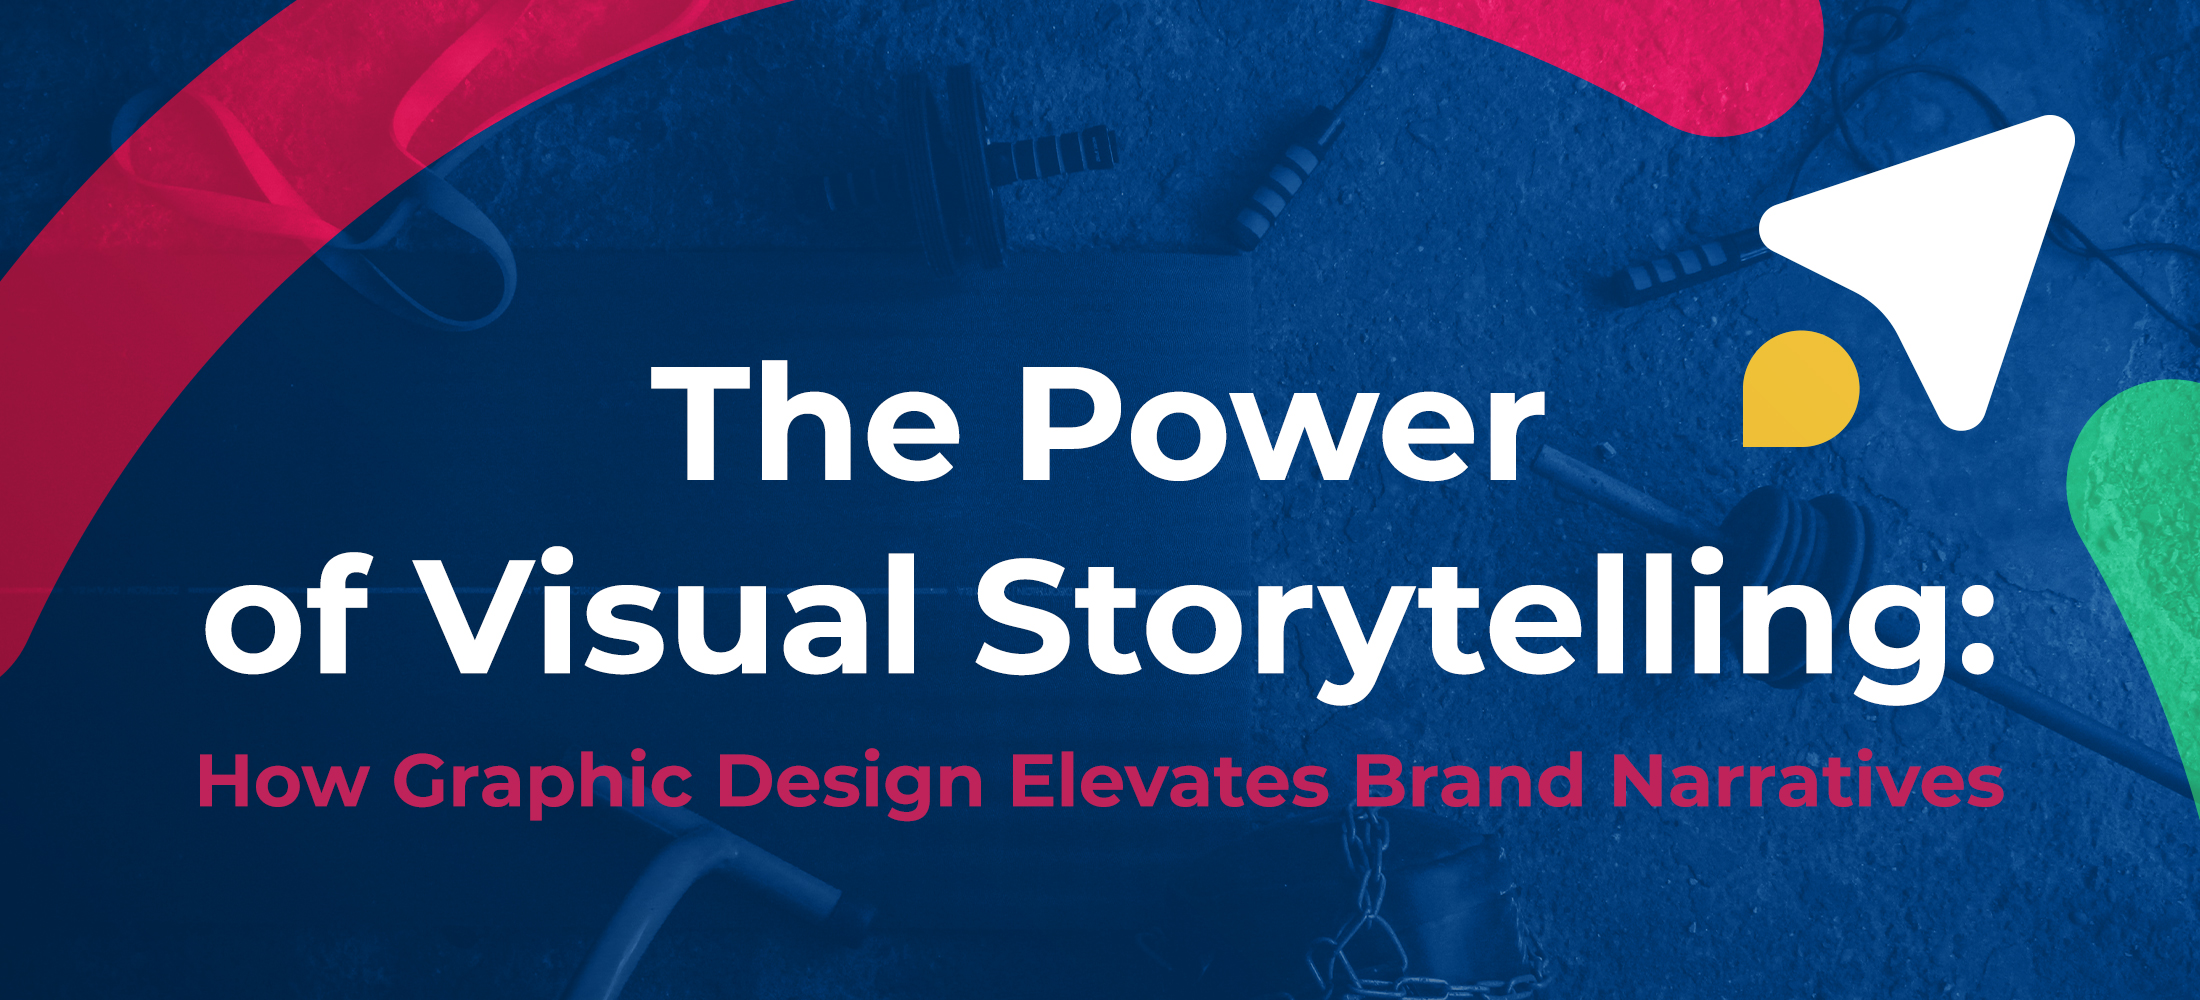 The Power of Visual Storytelling Feature Image